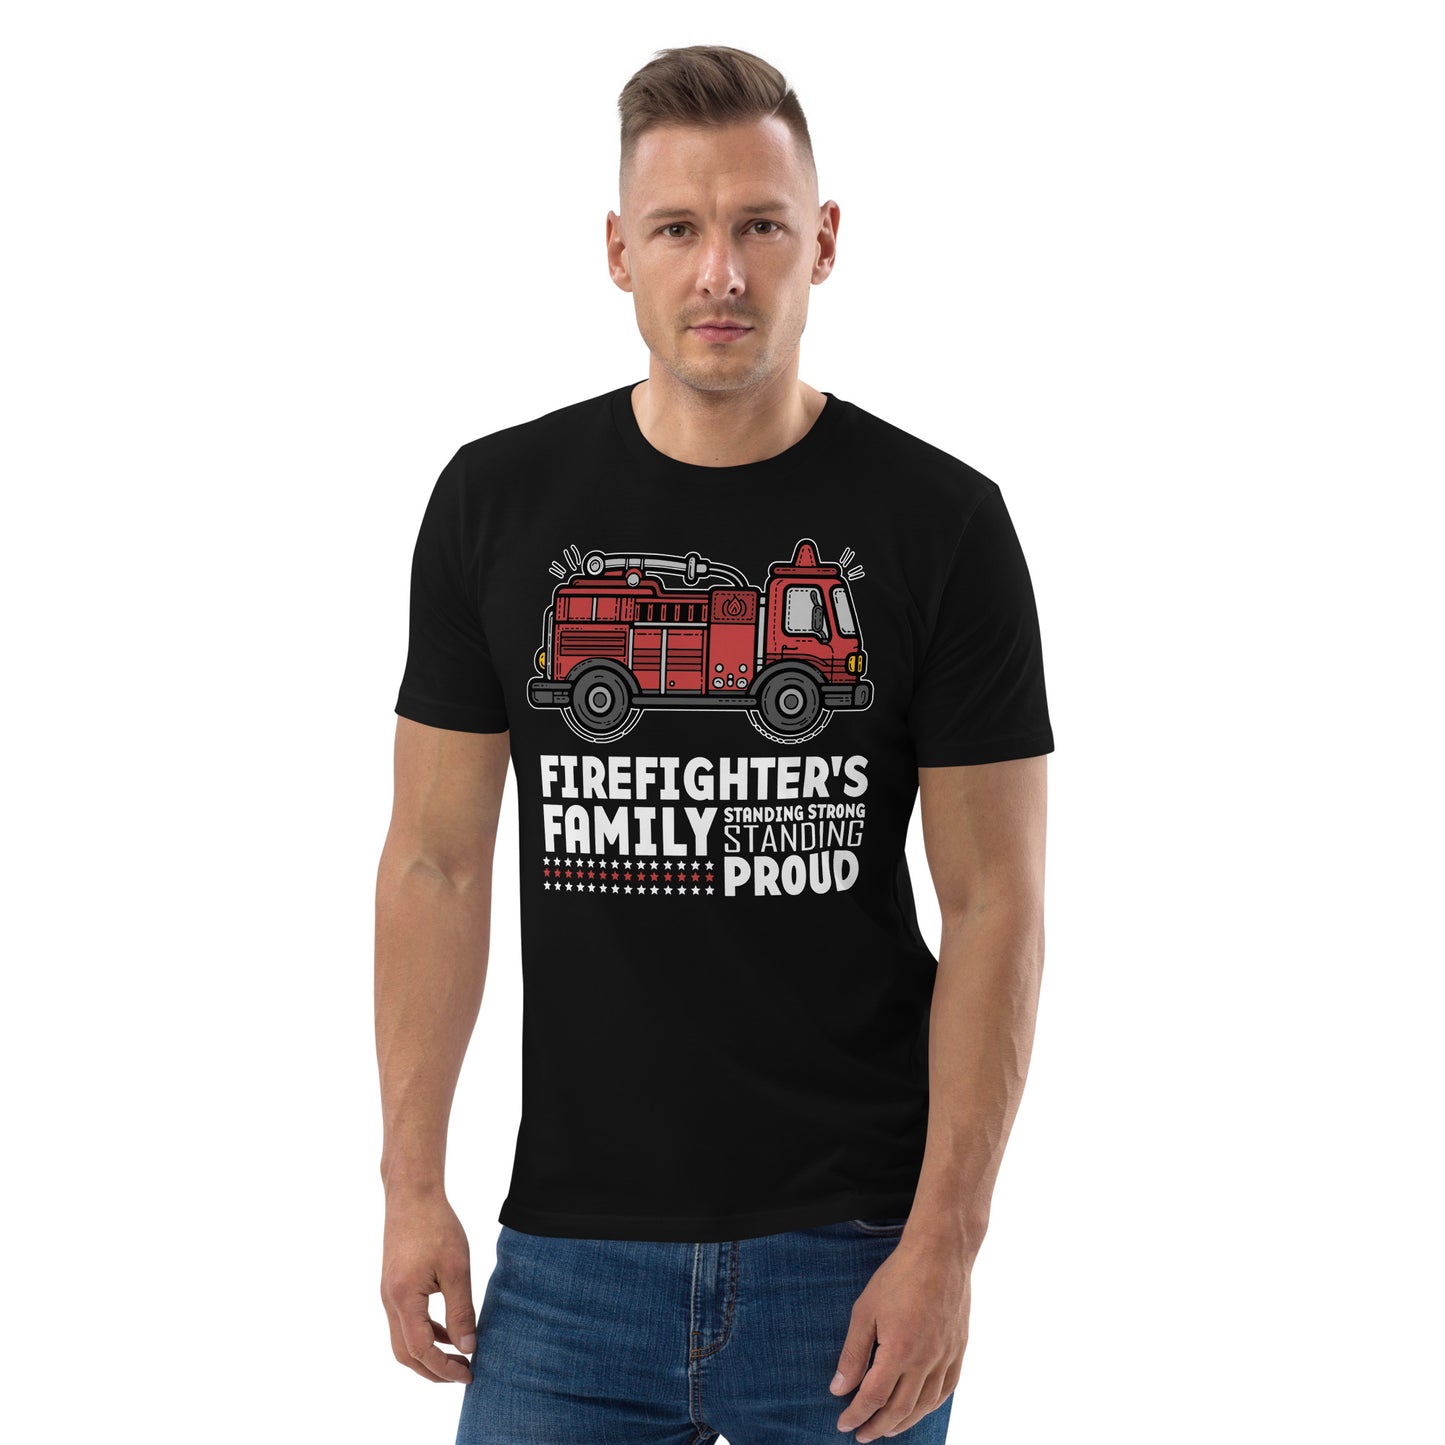 Firefighters Family standing strong standing Proud Bio-Baumwoll-T-Shirt